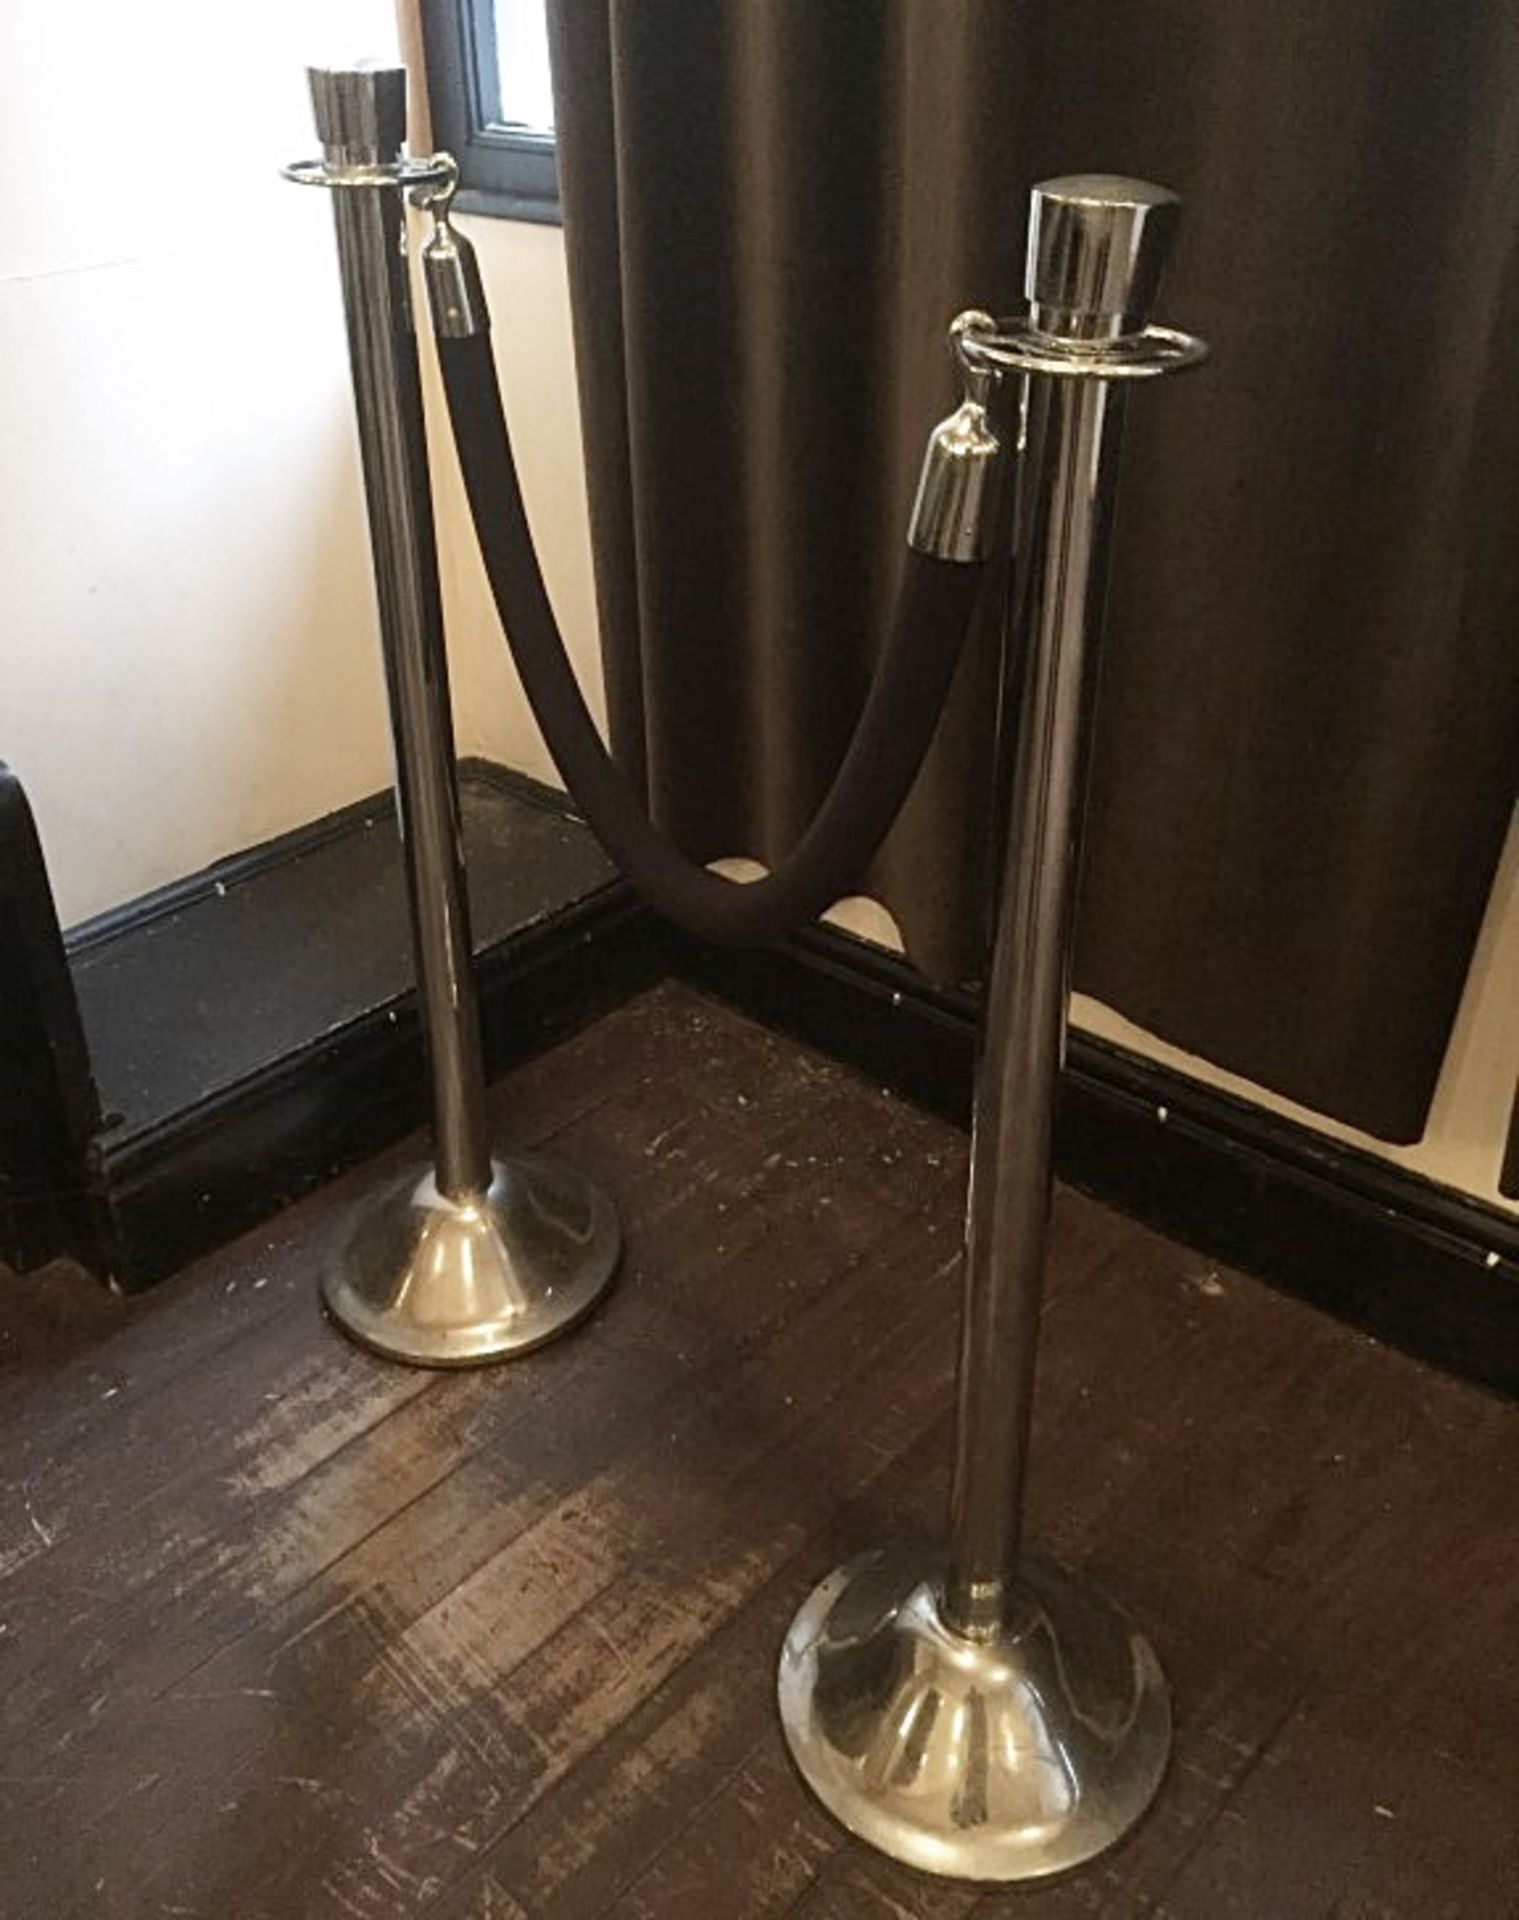 2 x Barrier Posts With Rope - Height: 104cm - Ref: APB011 - City Centre Bar Closure - CL165 -